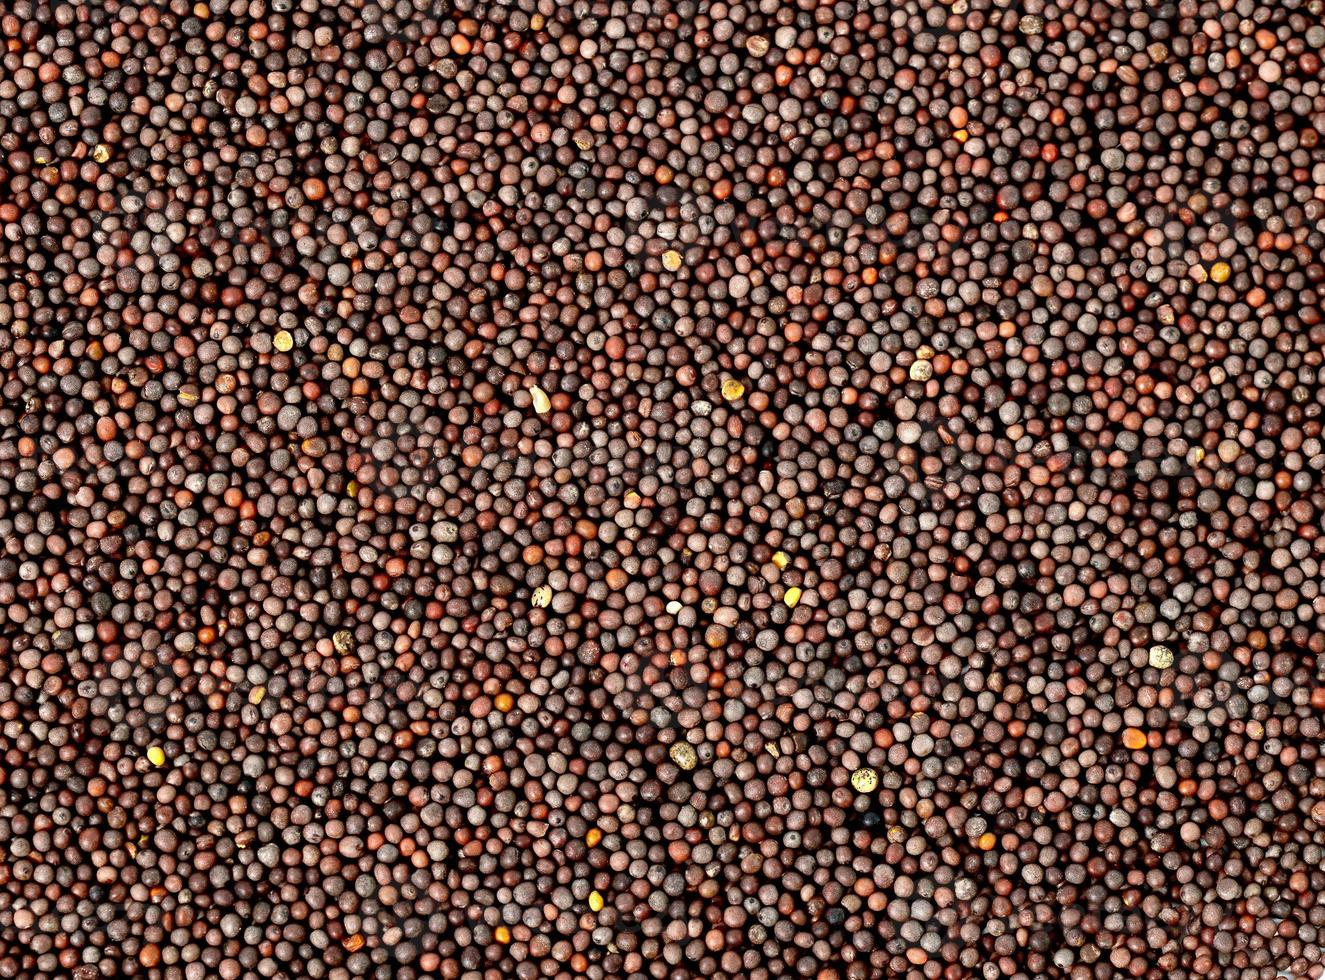 Brown Mustard Seeds on a white background photo